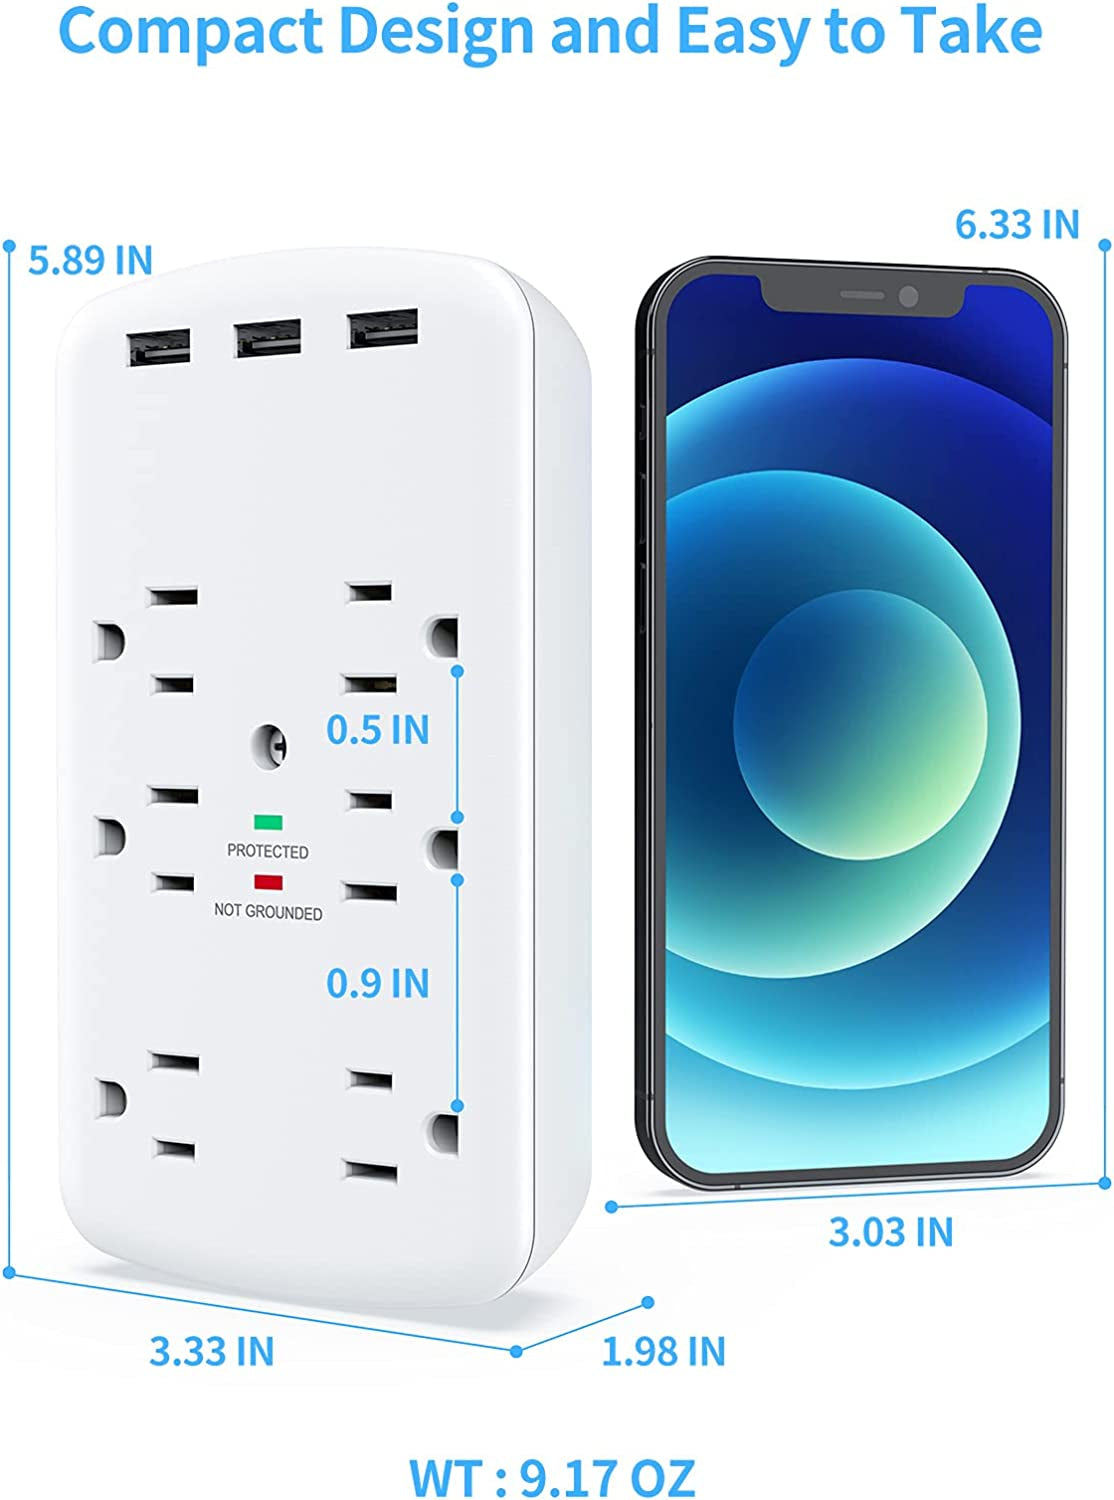 USB Outlet Extender, USB Wall Charger Surge Protector Wall Outlets 6AC Outlets Plug Extender Splitter with 3 USB Ports 1728J Power Strip Multi Plug Outlets Adapter for Home, Office, Travel